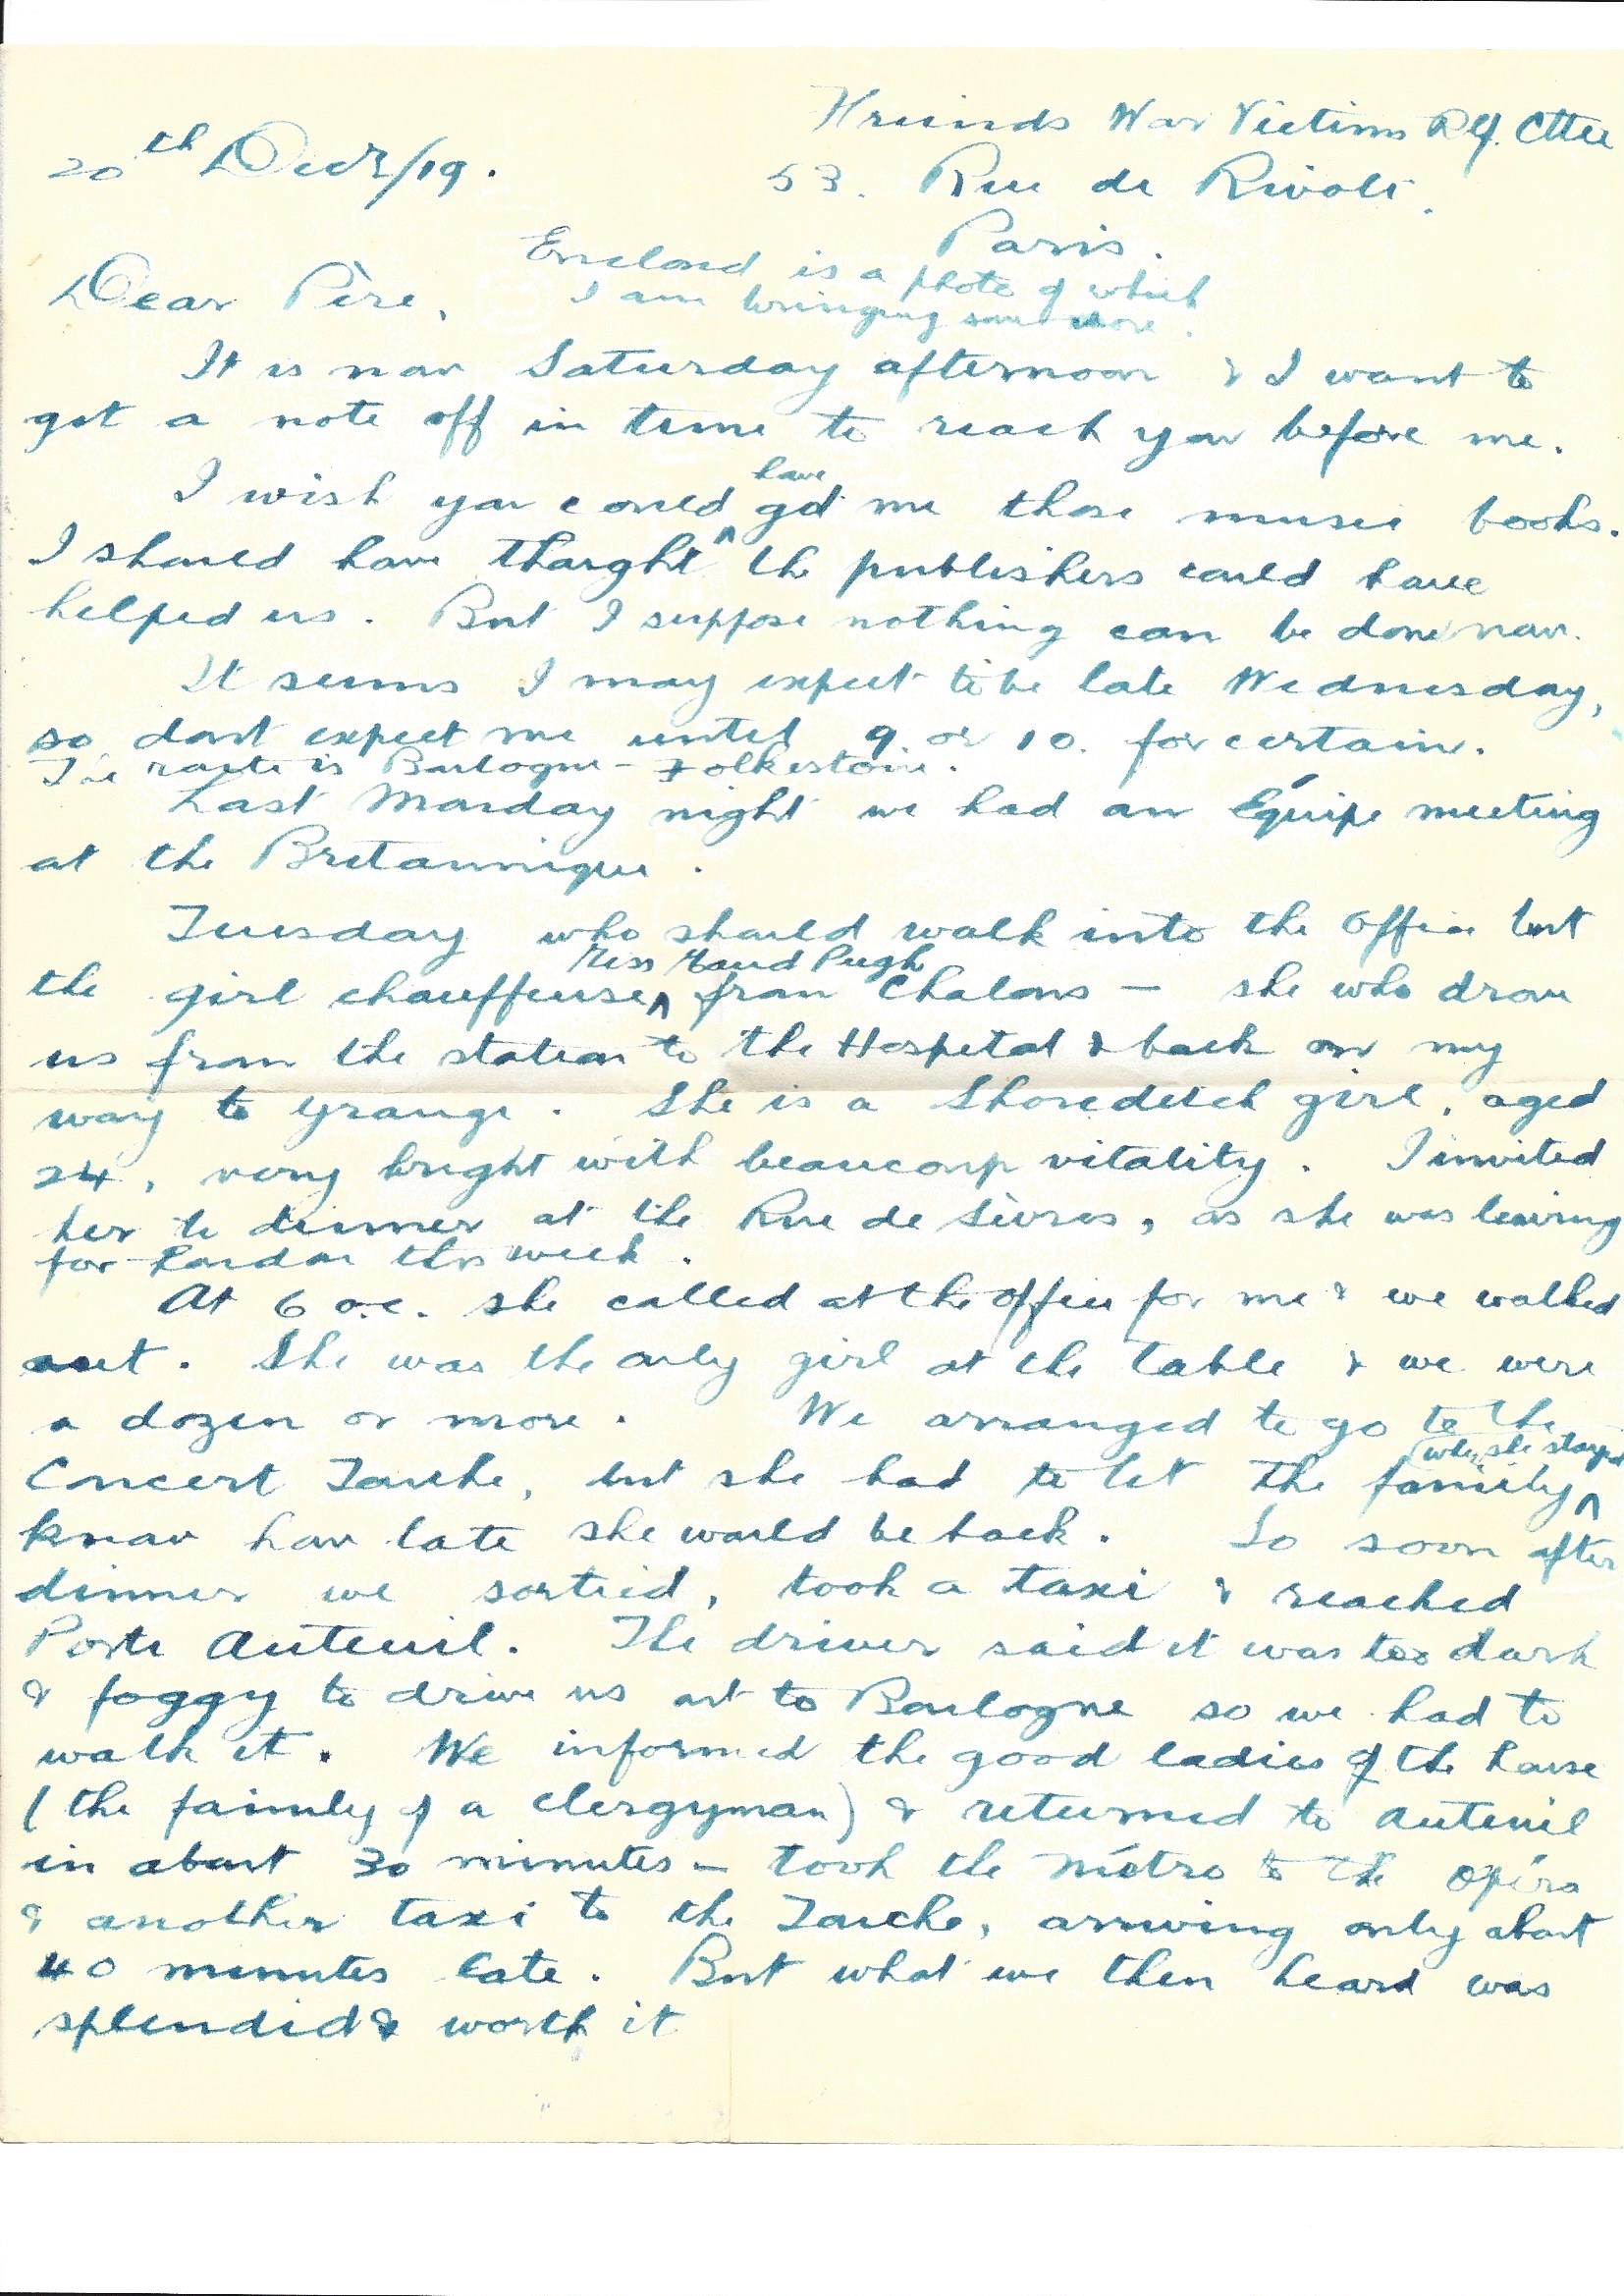 1919-12-20 page 2 letter by Donald Bearman